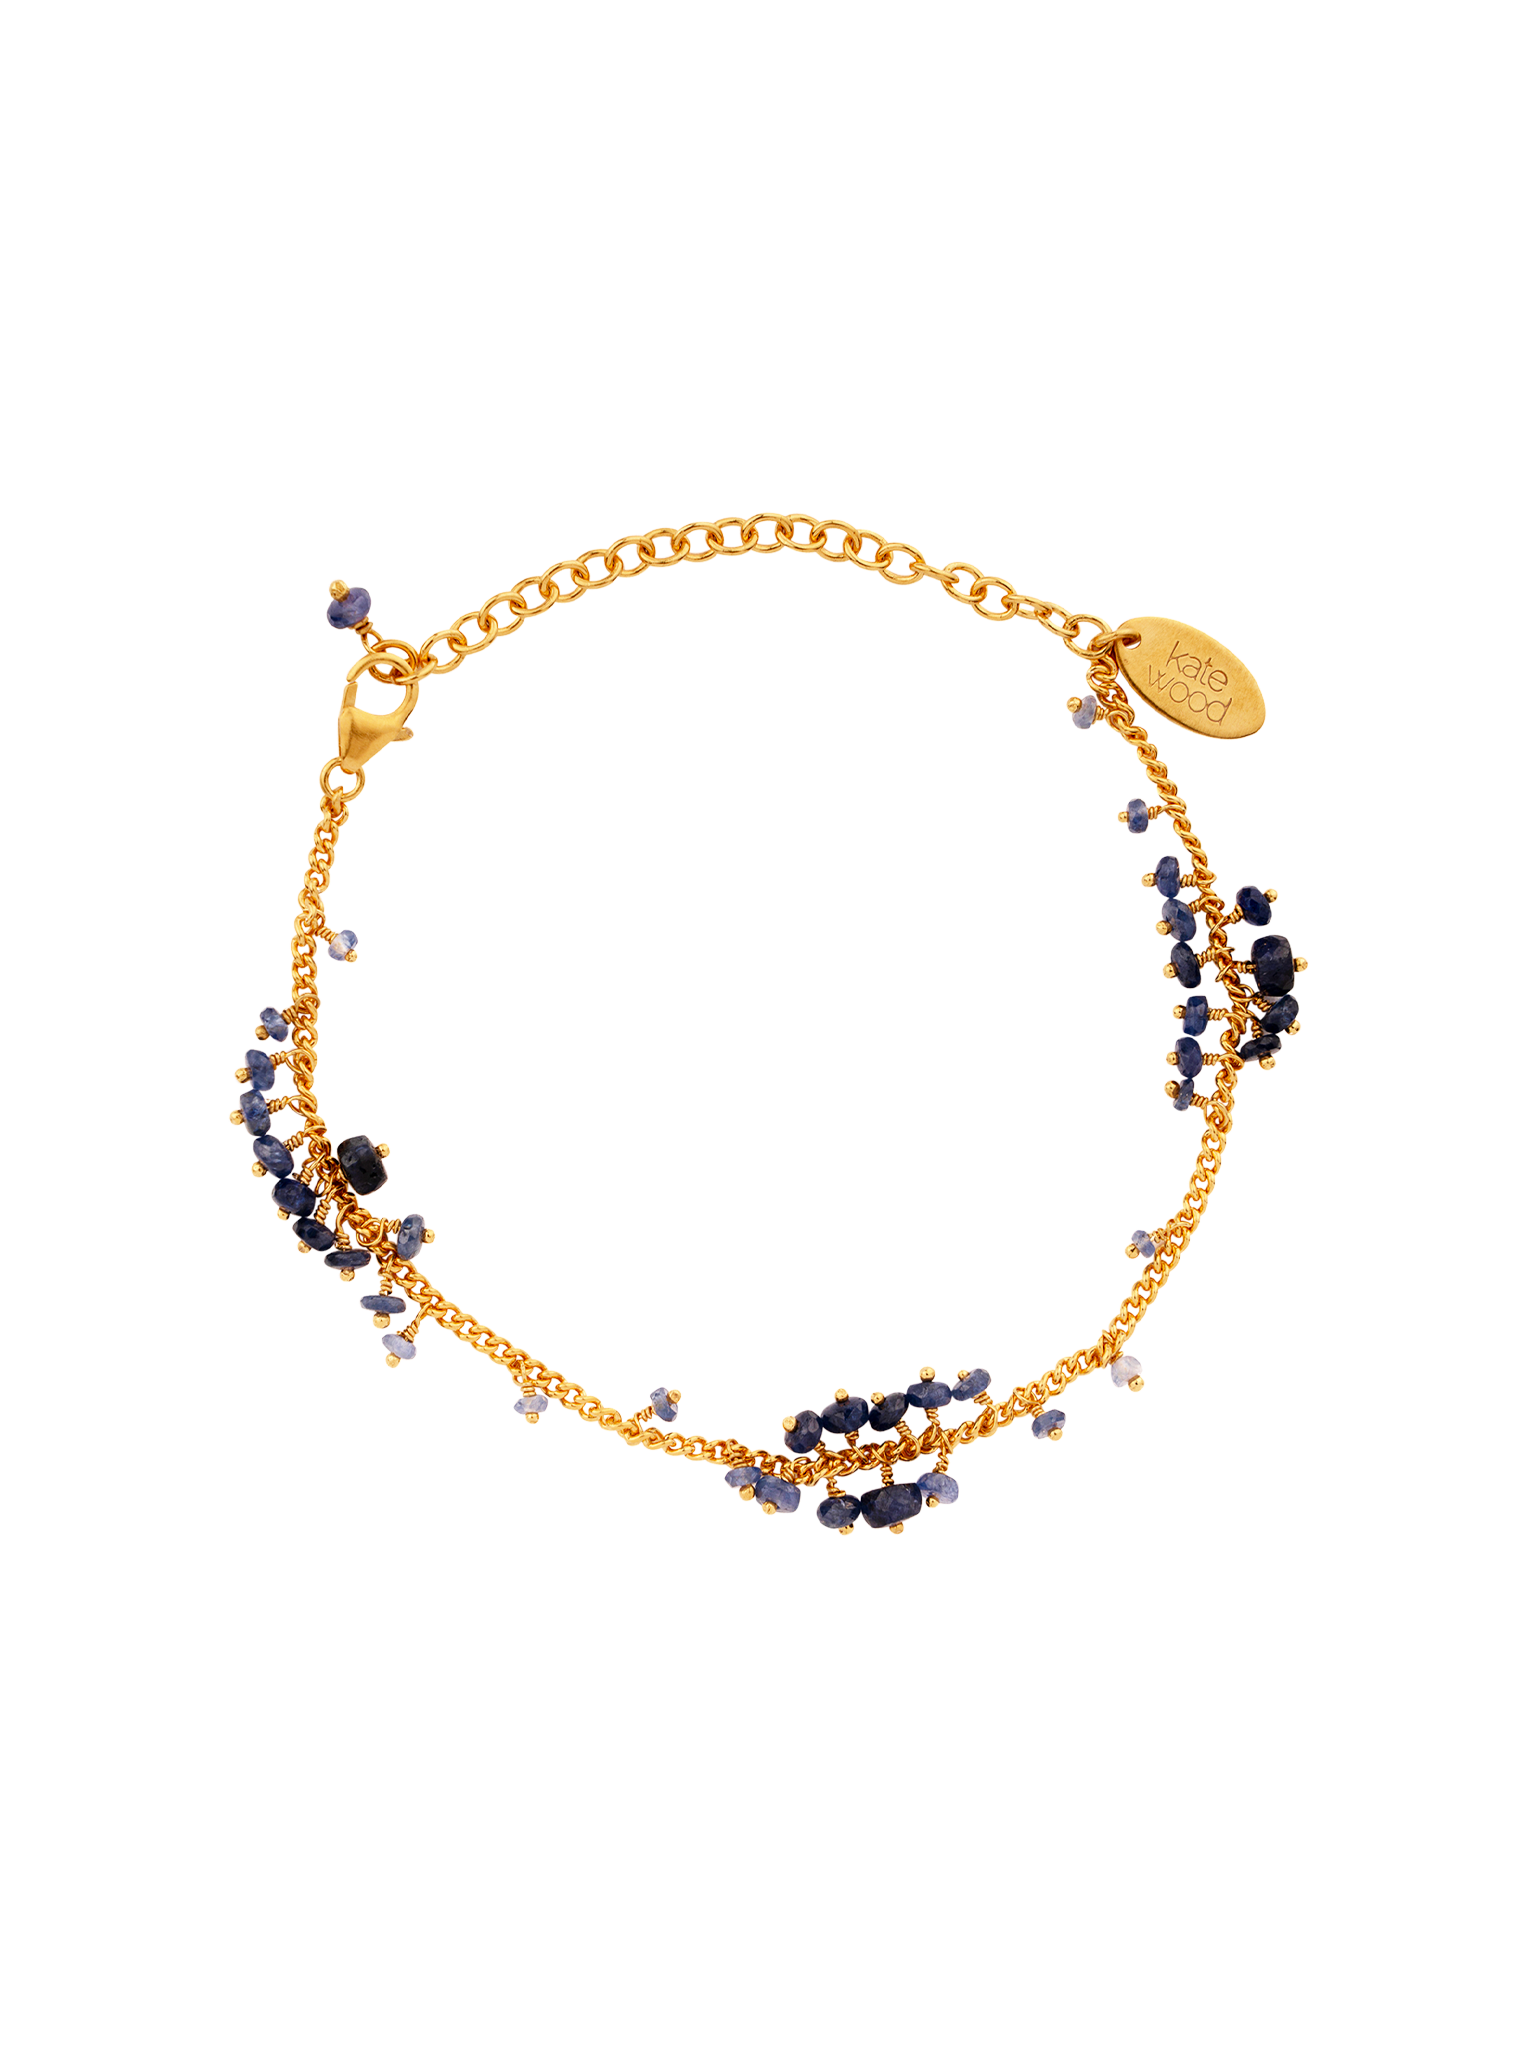 Scattered row beaded bracelet in sapphire and gold vermeil